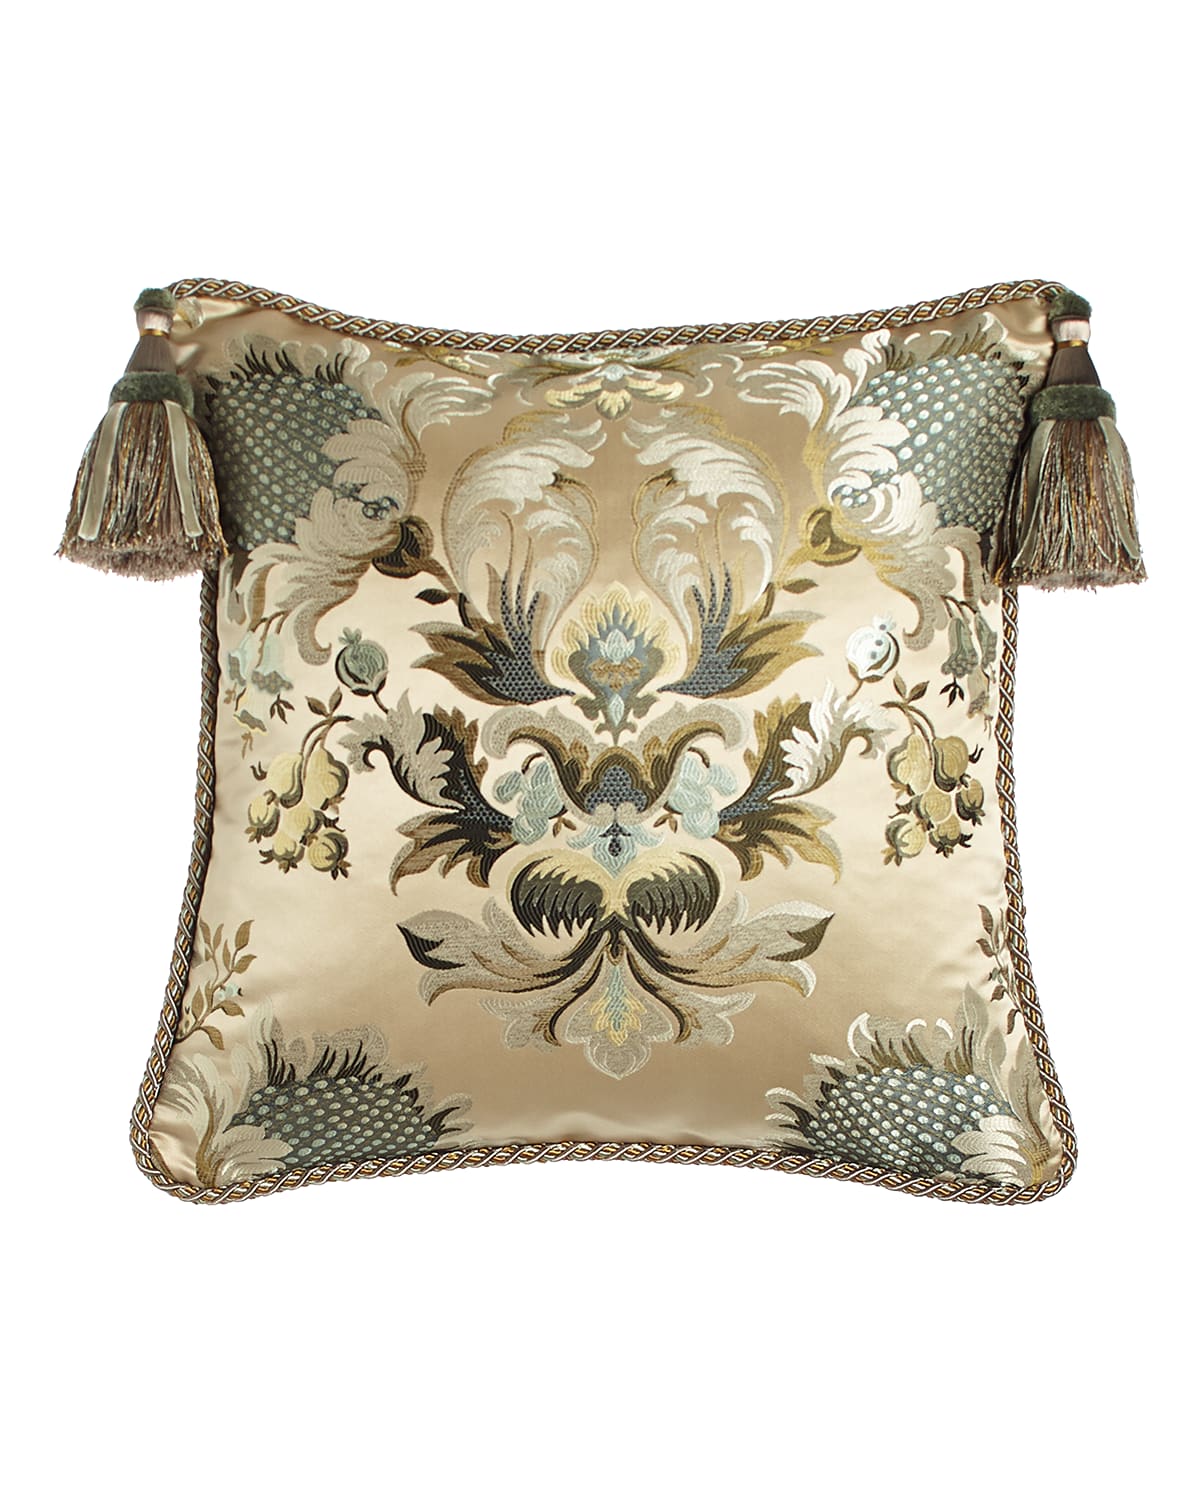 Image Austin Horn Collection Rochelle Floral Pillow, 20"Sq.